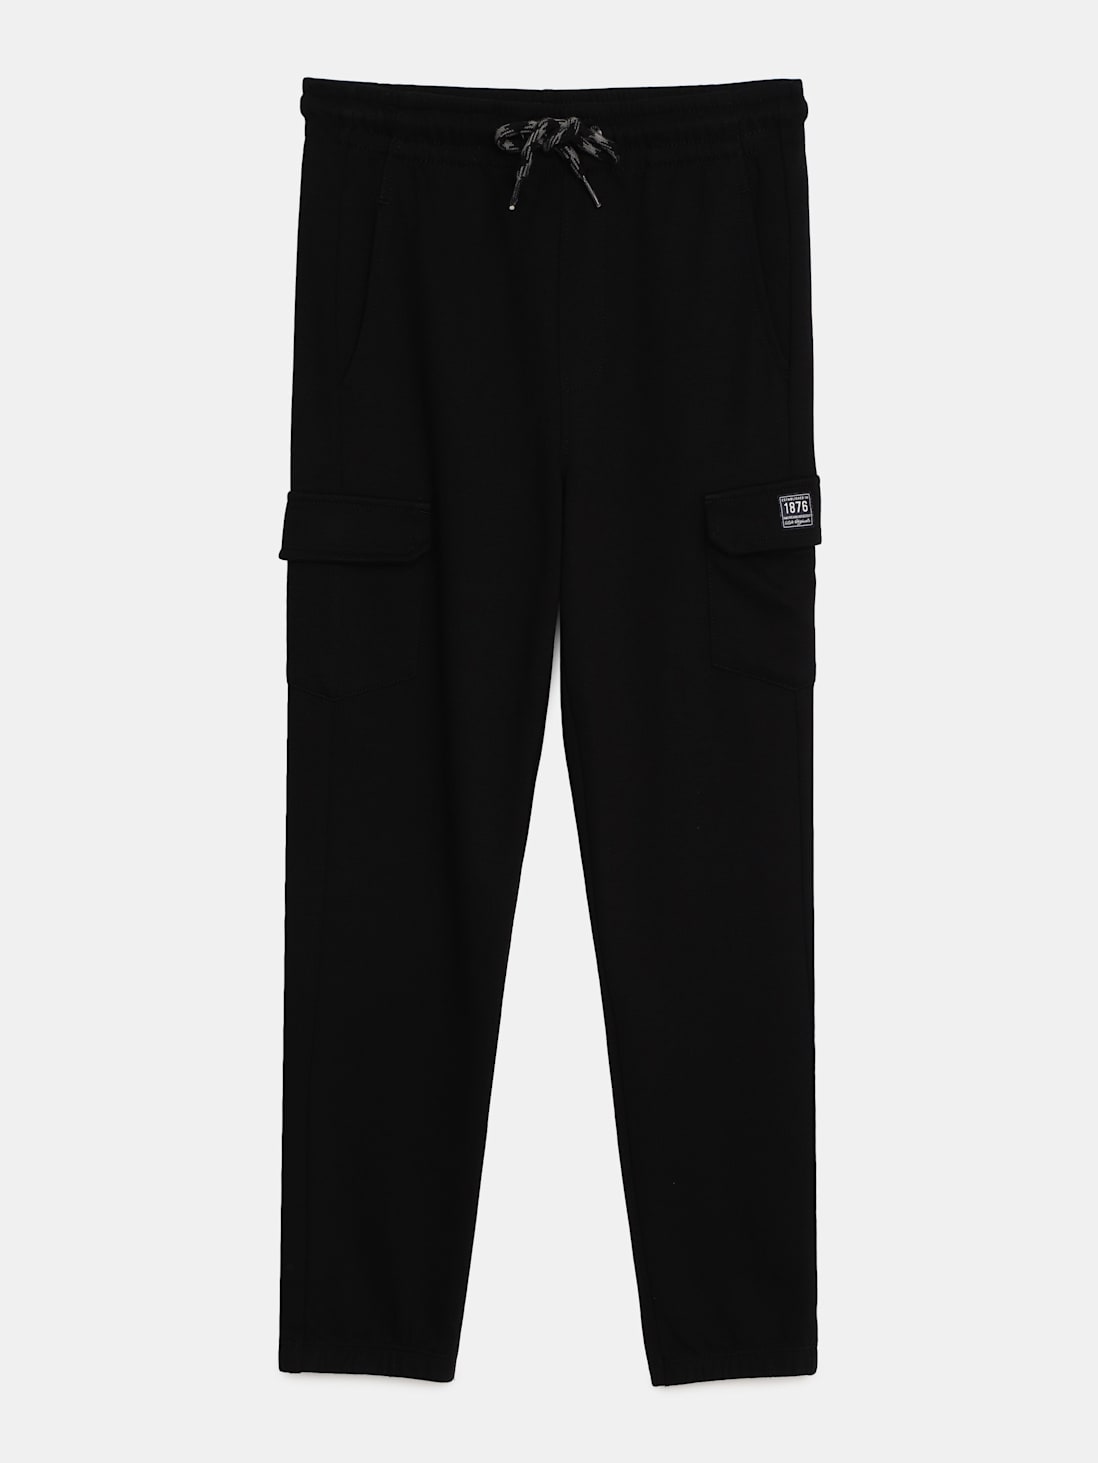 VS by Sehwag Poly Cotton PC Trackpant for Men Black – VS Shop